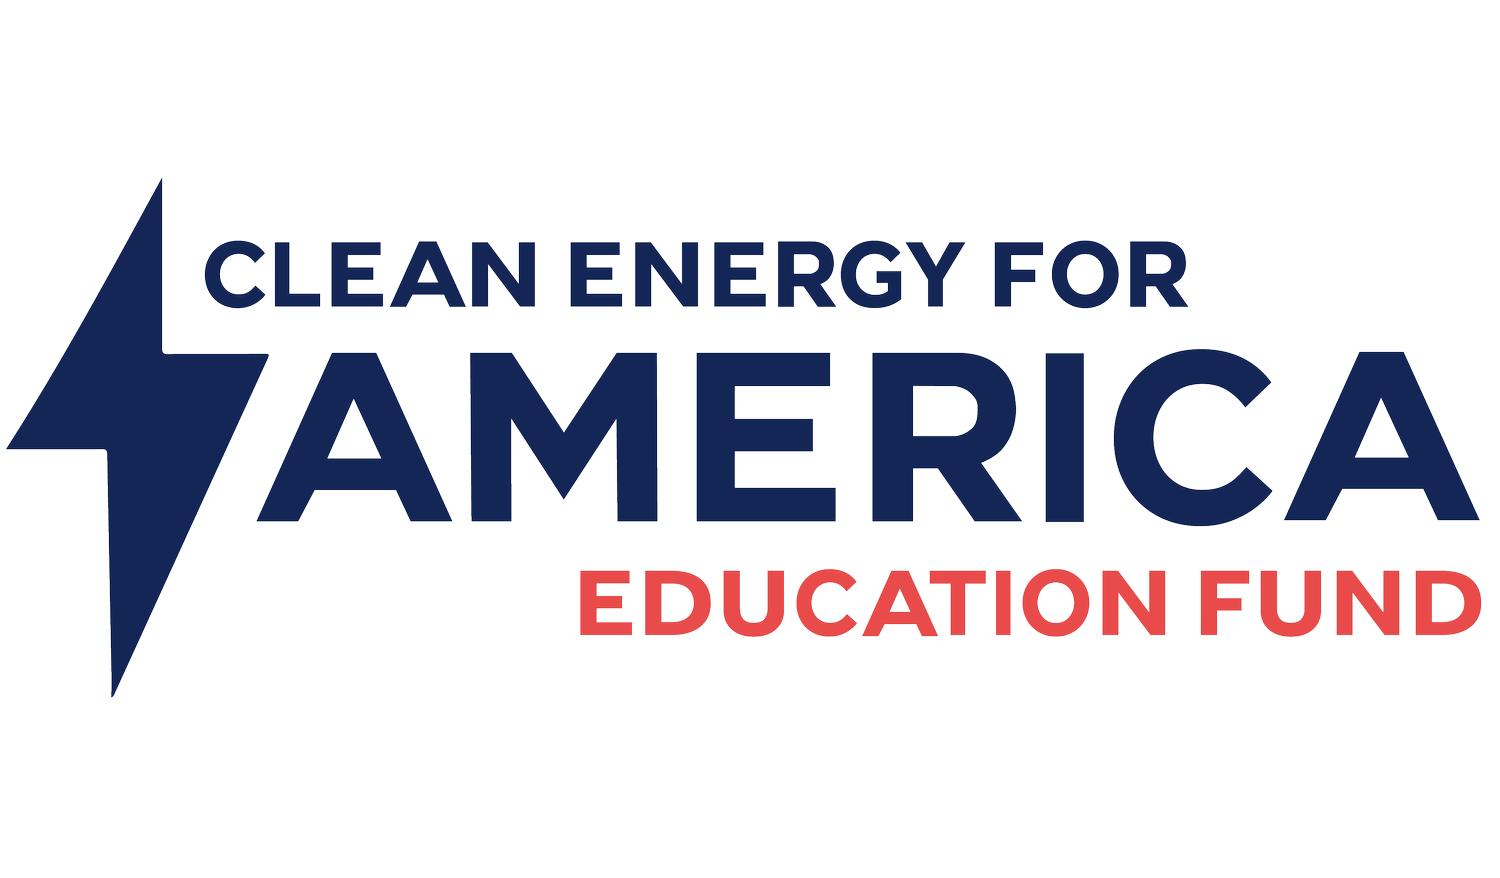 Clean Energy for America Education Fund